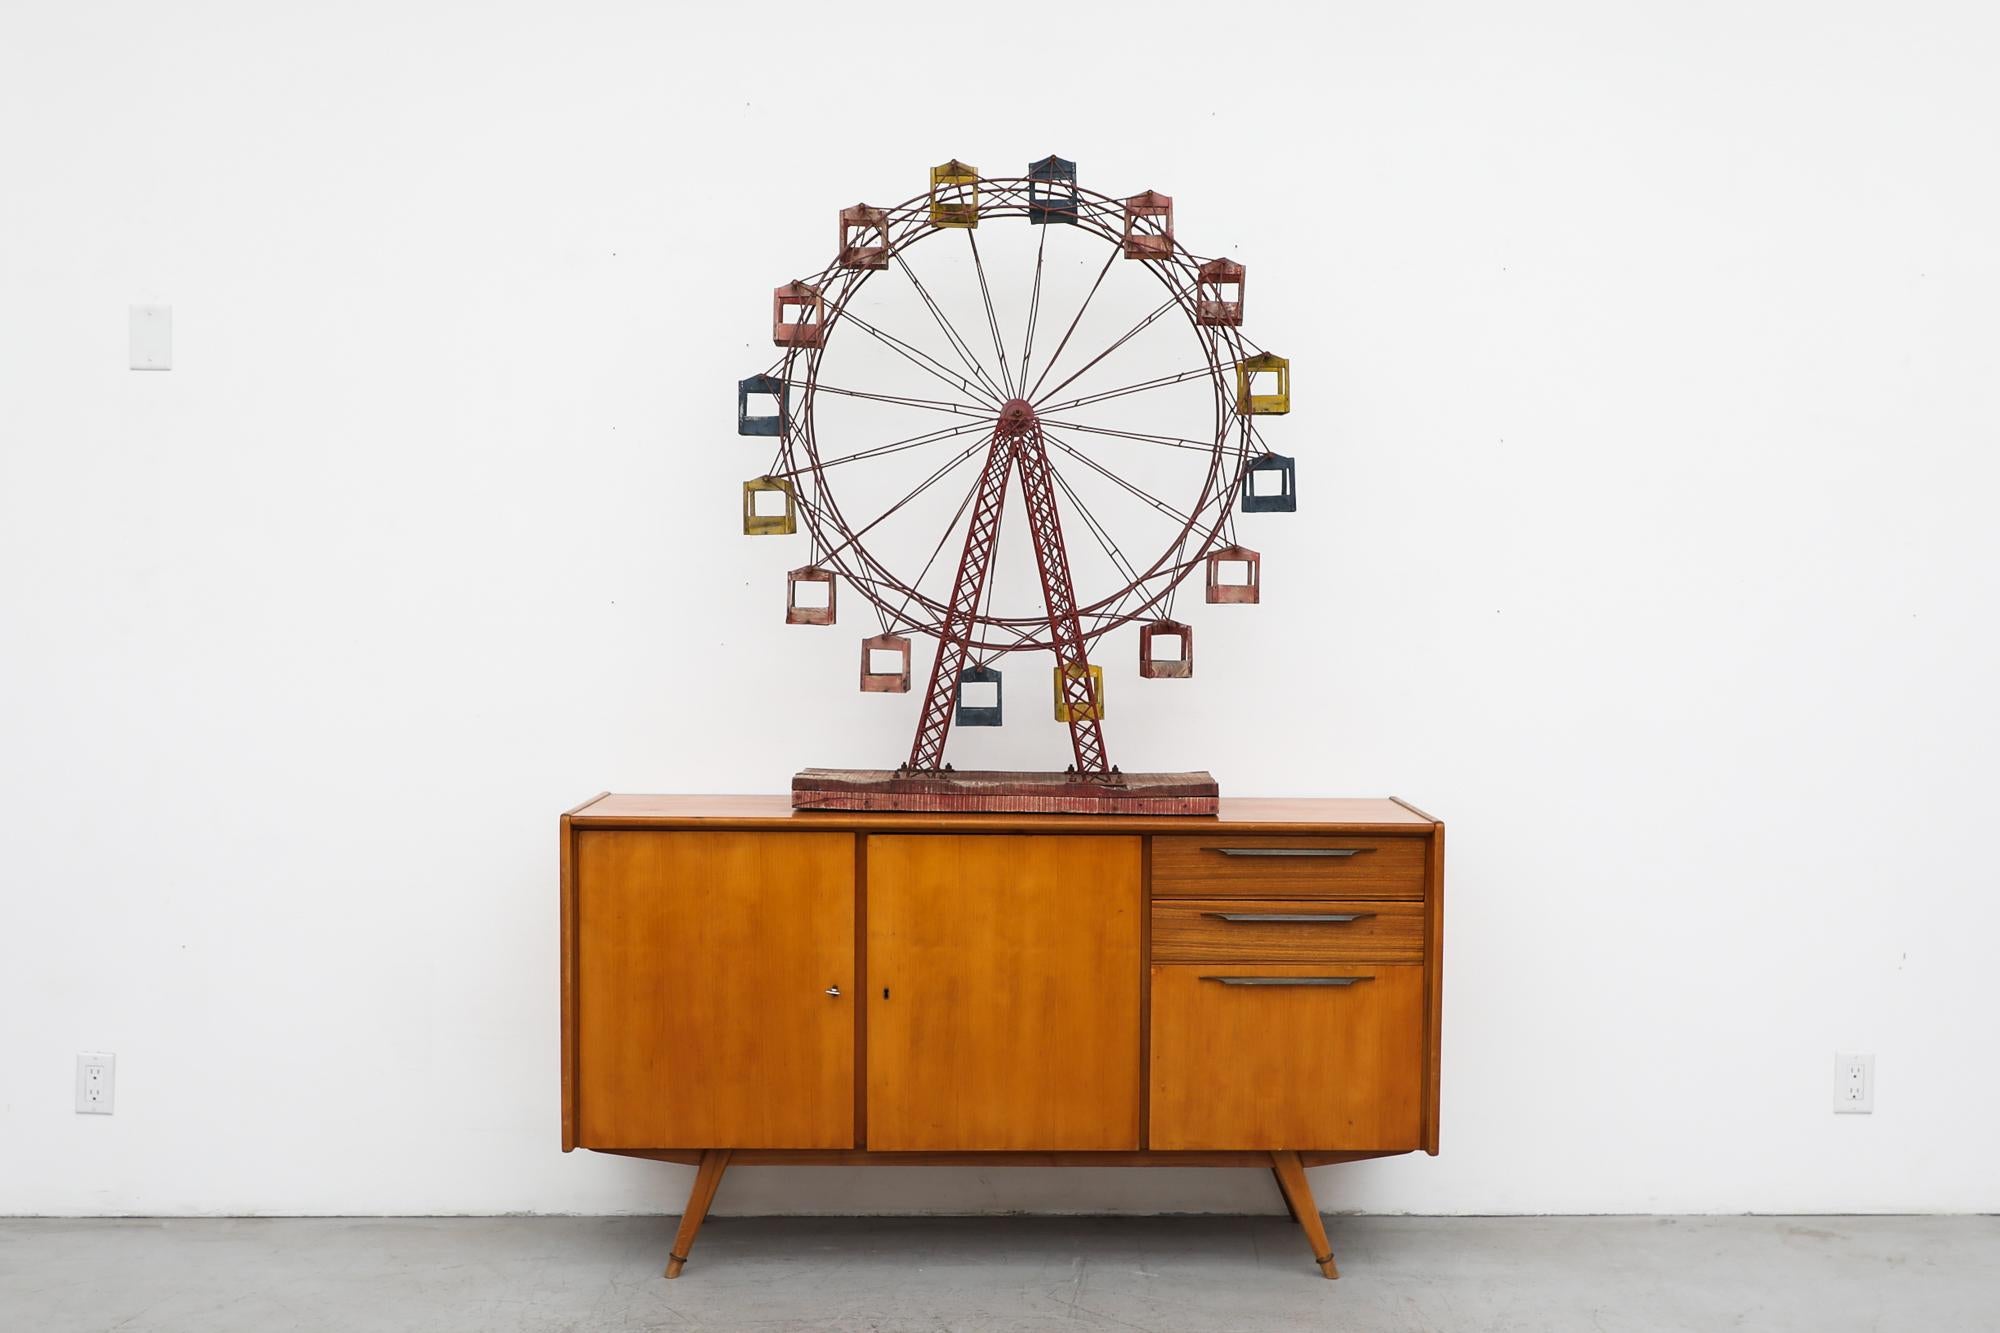 Fun Mid-Century Ferris Wheel with red enameled metal frame and wooden cabins mounted on a wooden block. The wheels spins and the little cabins move as well. In original condition with visible wear and patina, including some loose welds and hand